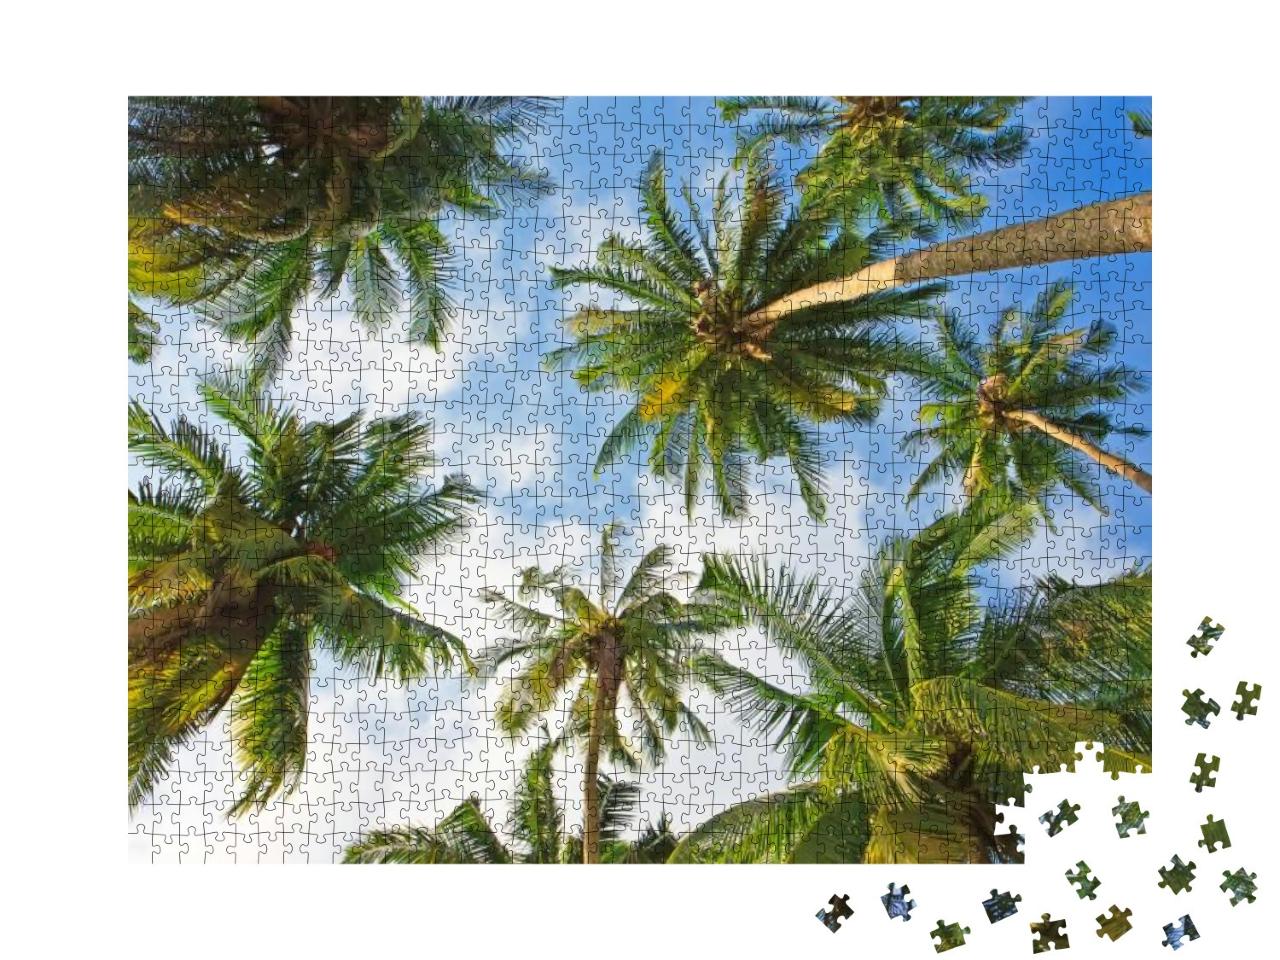 Coconut Palm Trees Perspective View... Jigsaw Puzzle with 1000 pieces